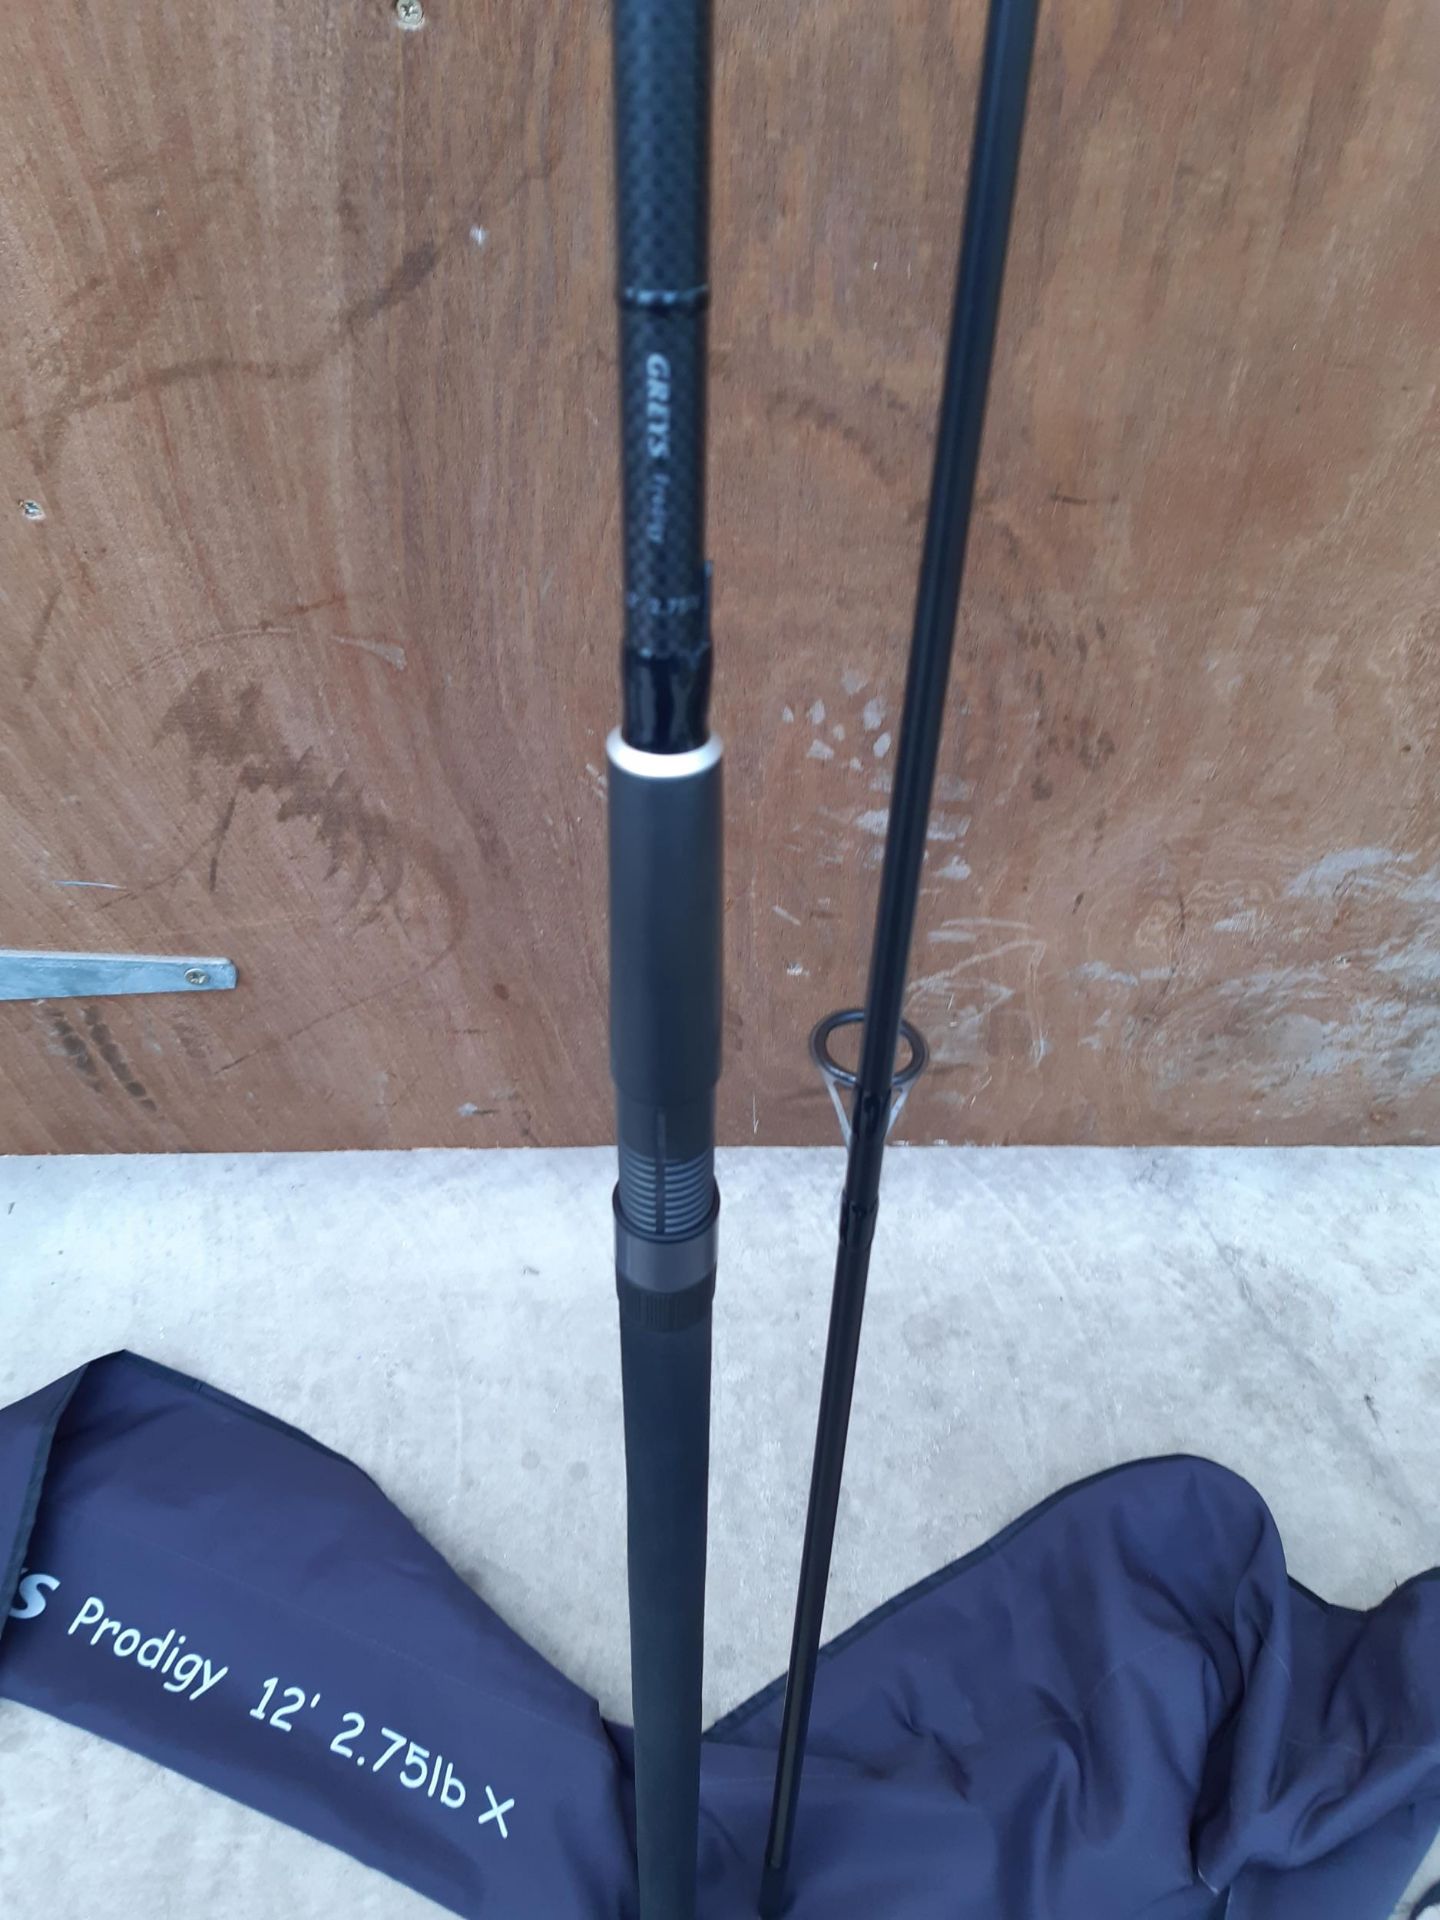 A 12FT 2.75LB GREYS PRODIGY CARP FISHING ROD. VENDOR STATES IT HAS ONLY BEEN USED TWICE - Image 5 of 8